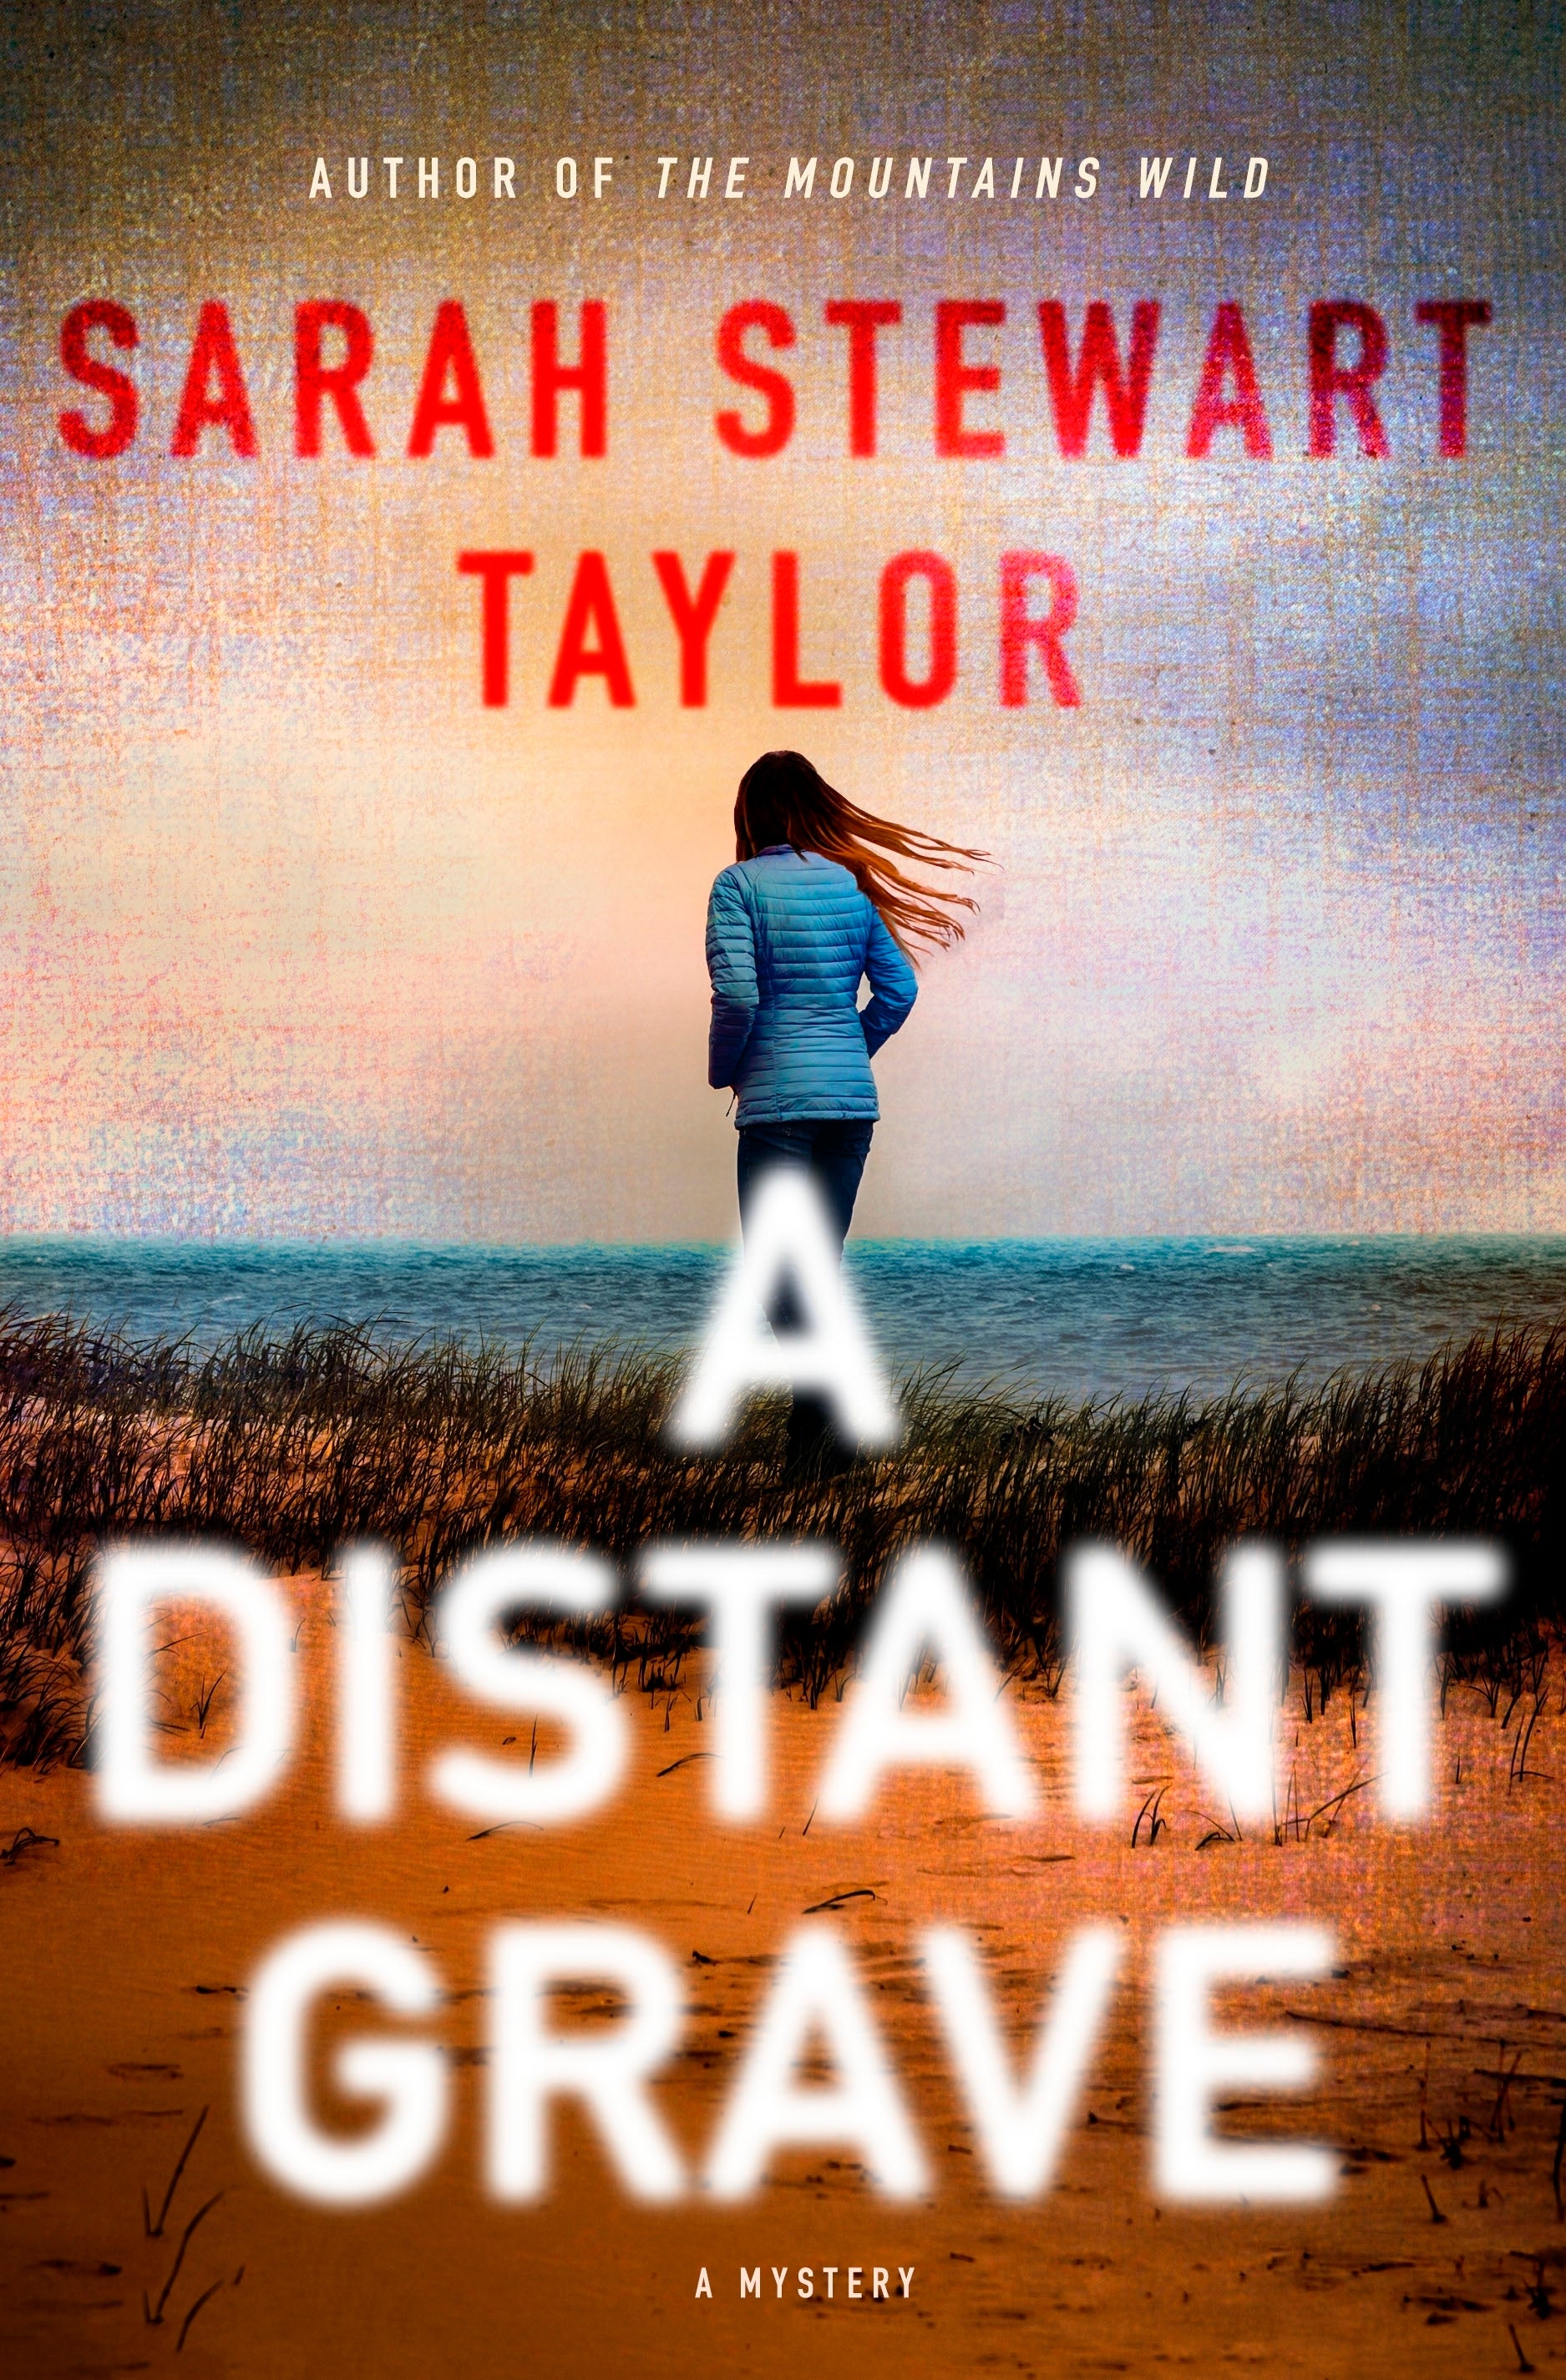 Book Review - A Distant Grave